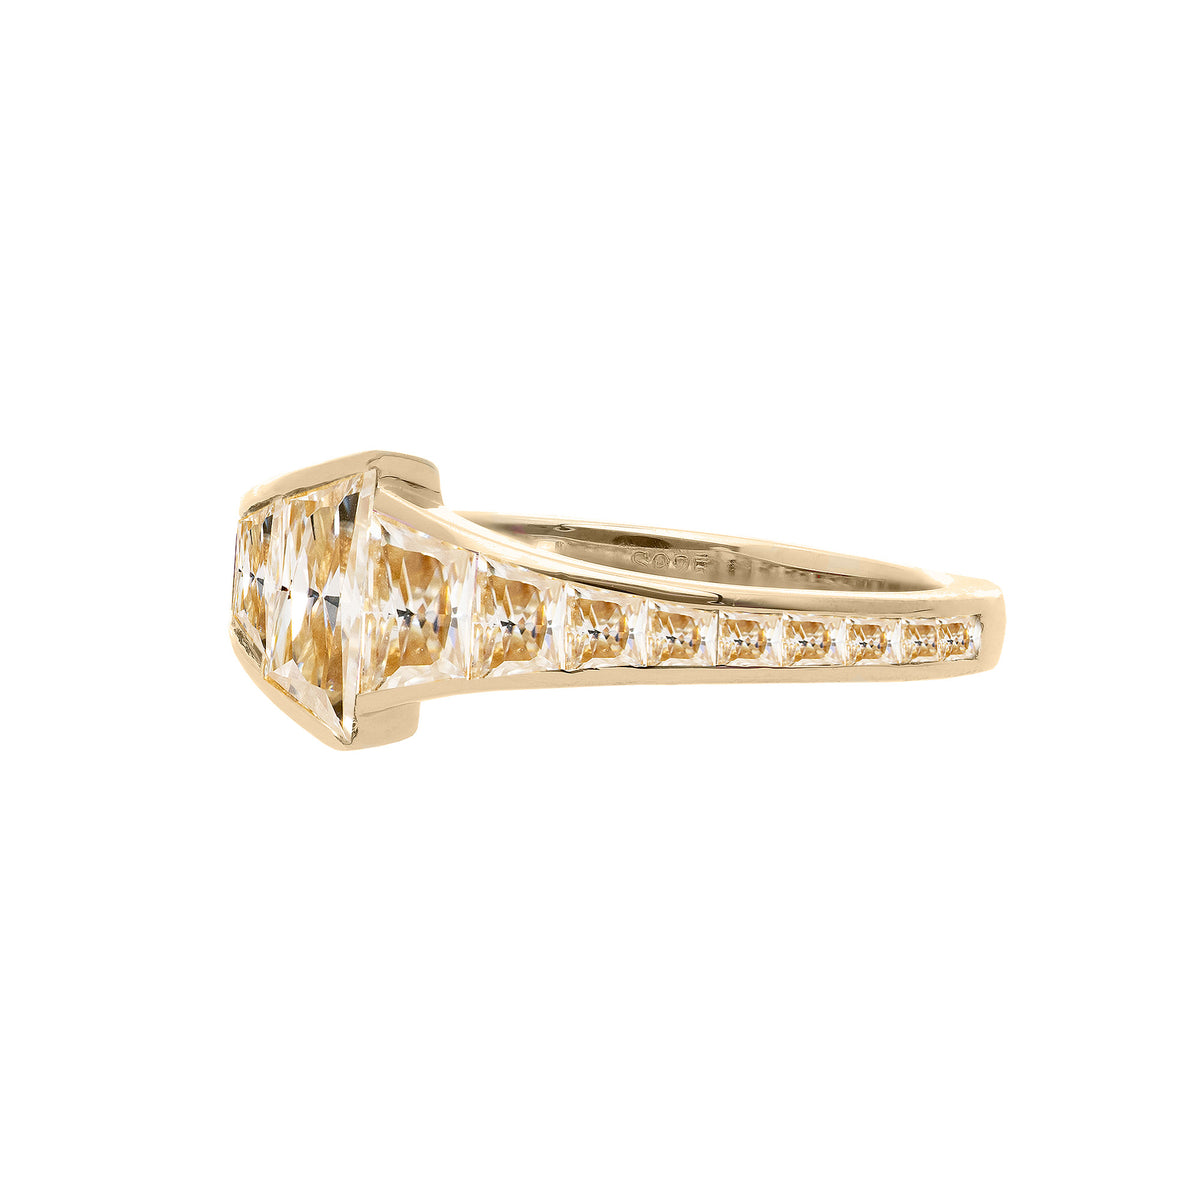 The Yellow Radiant Trapezoid Ring